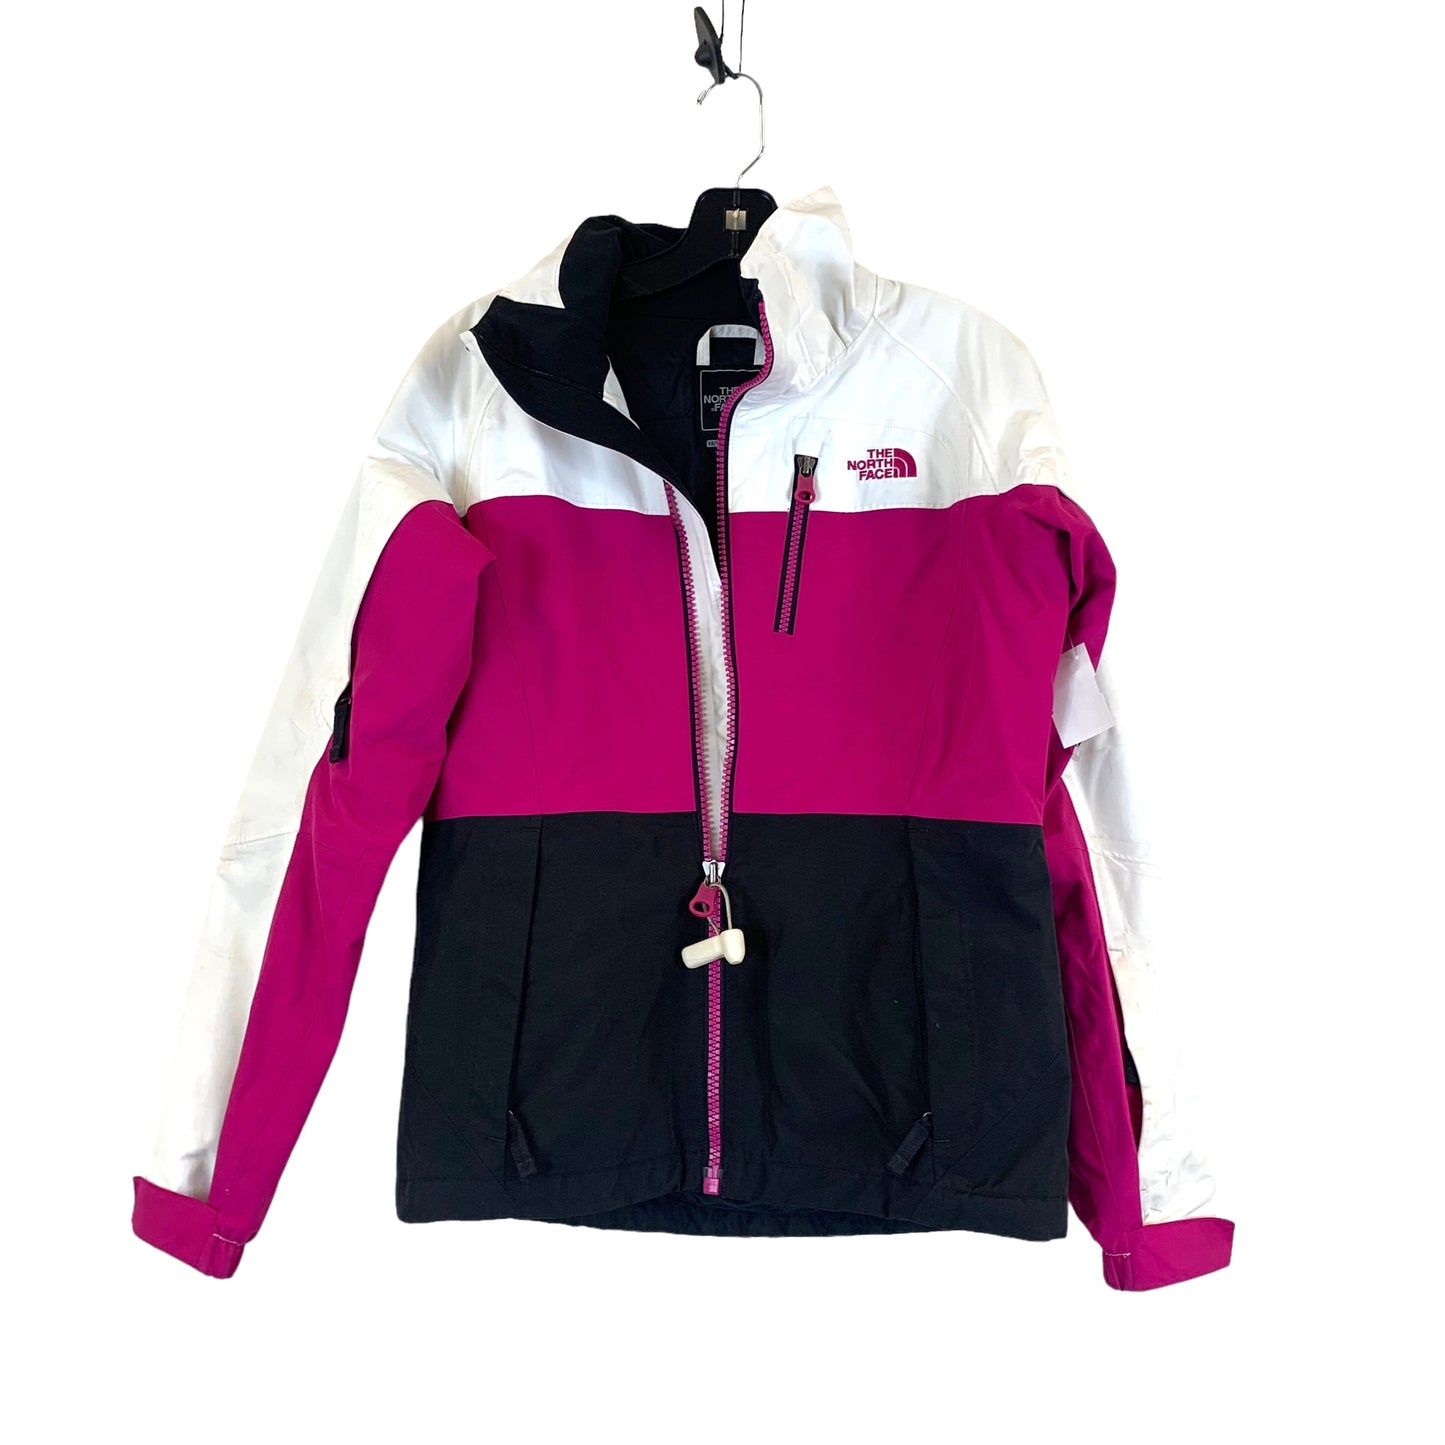 Jacket Other By The North Face  Size: Xs